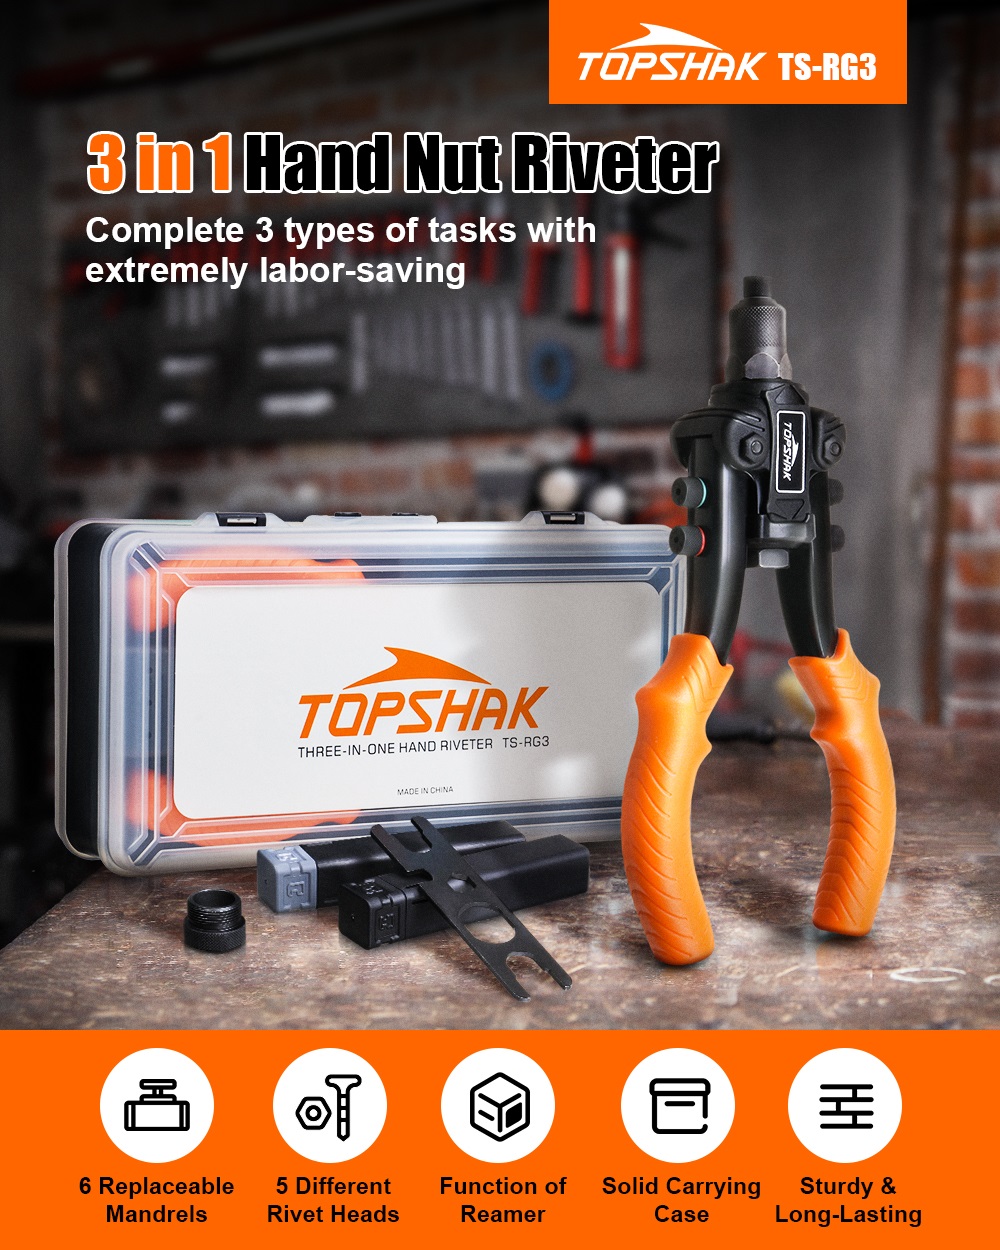 TOPSHAK-RG3-Hand-Nut-Riveter-Complete--3-in-1-Types-of-Tasks-with-Extremely-Labor-Saving-1913023-1